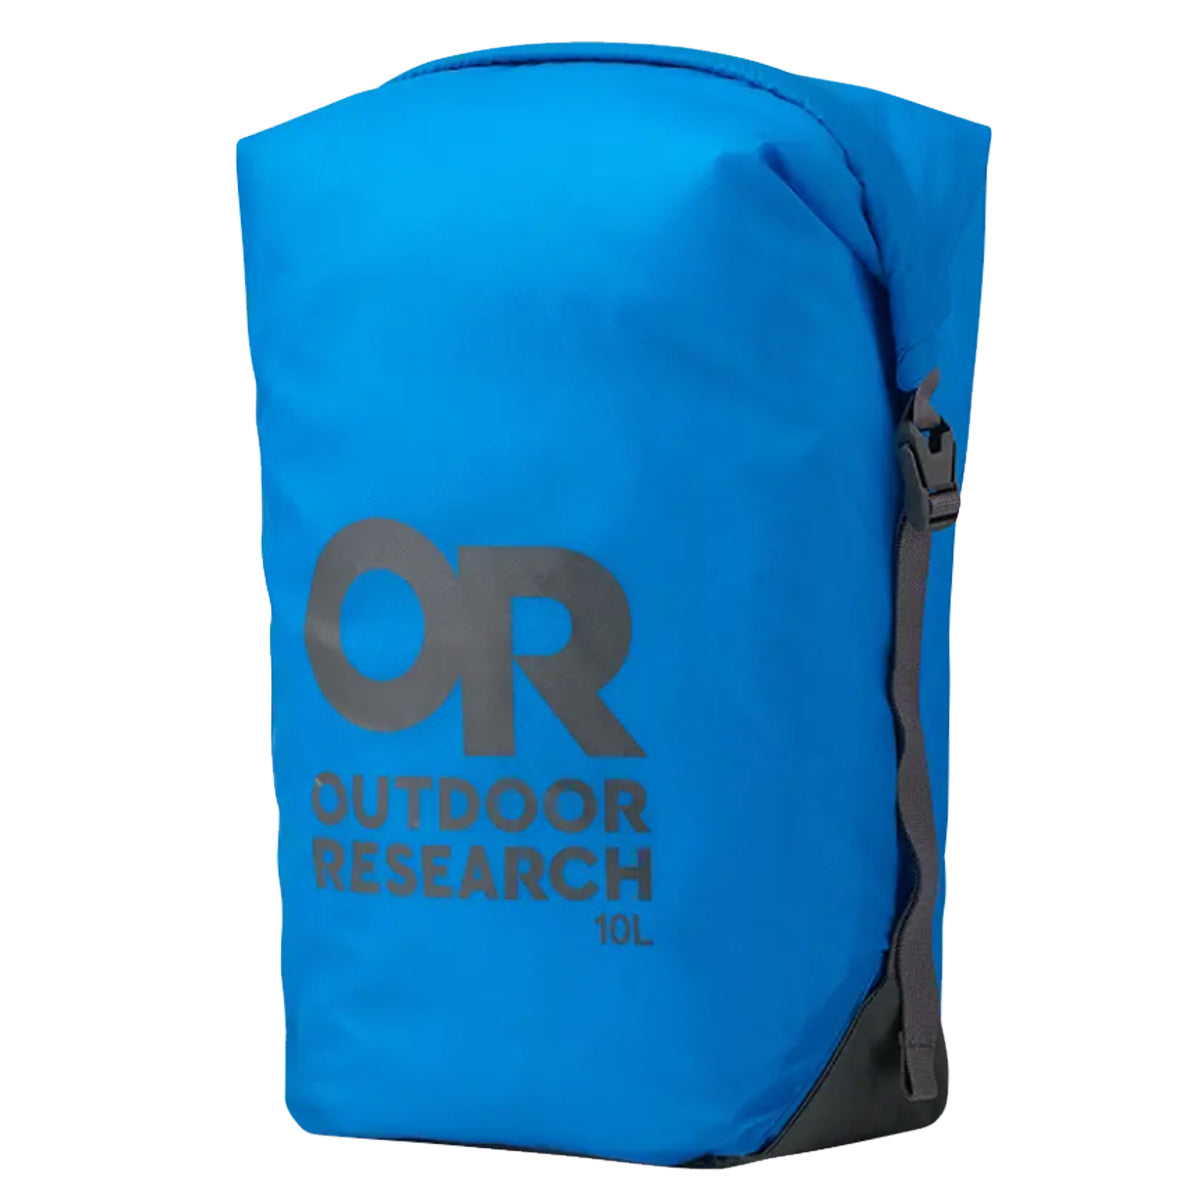 Outdoor Research PackOut Compression Sack in  by GOHUNT | Outdoor Research - GOHUNT Shop